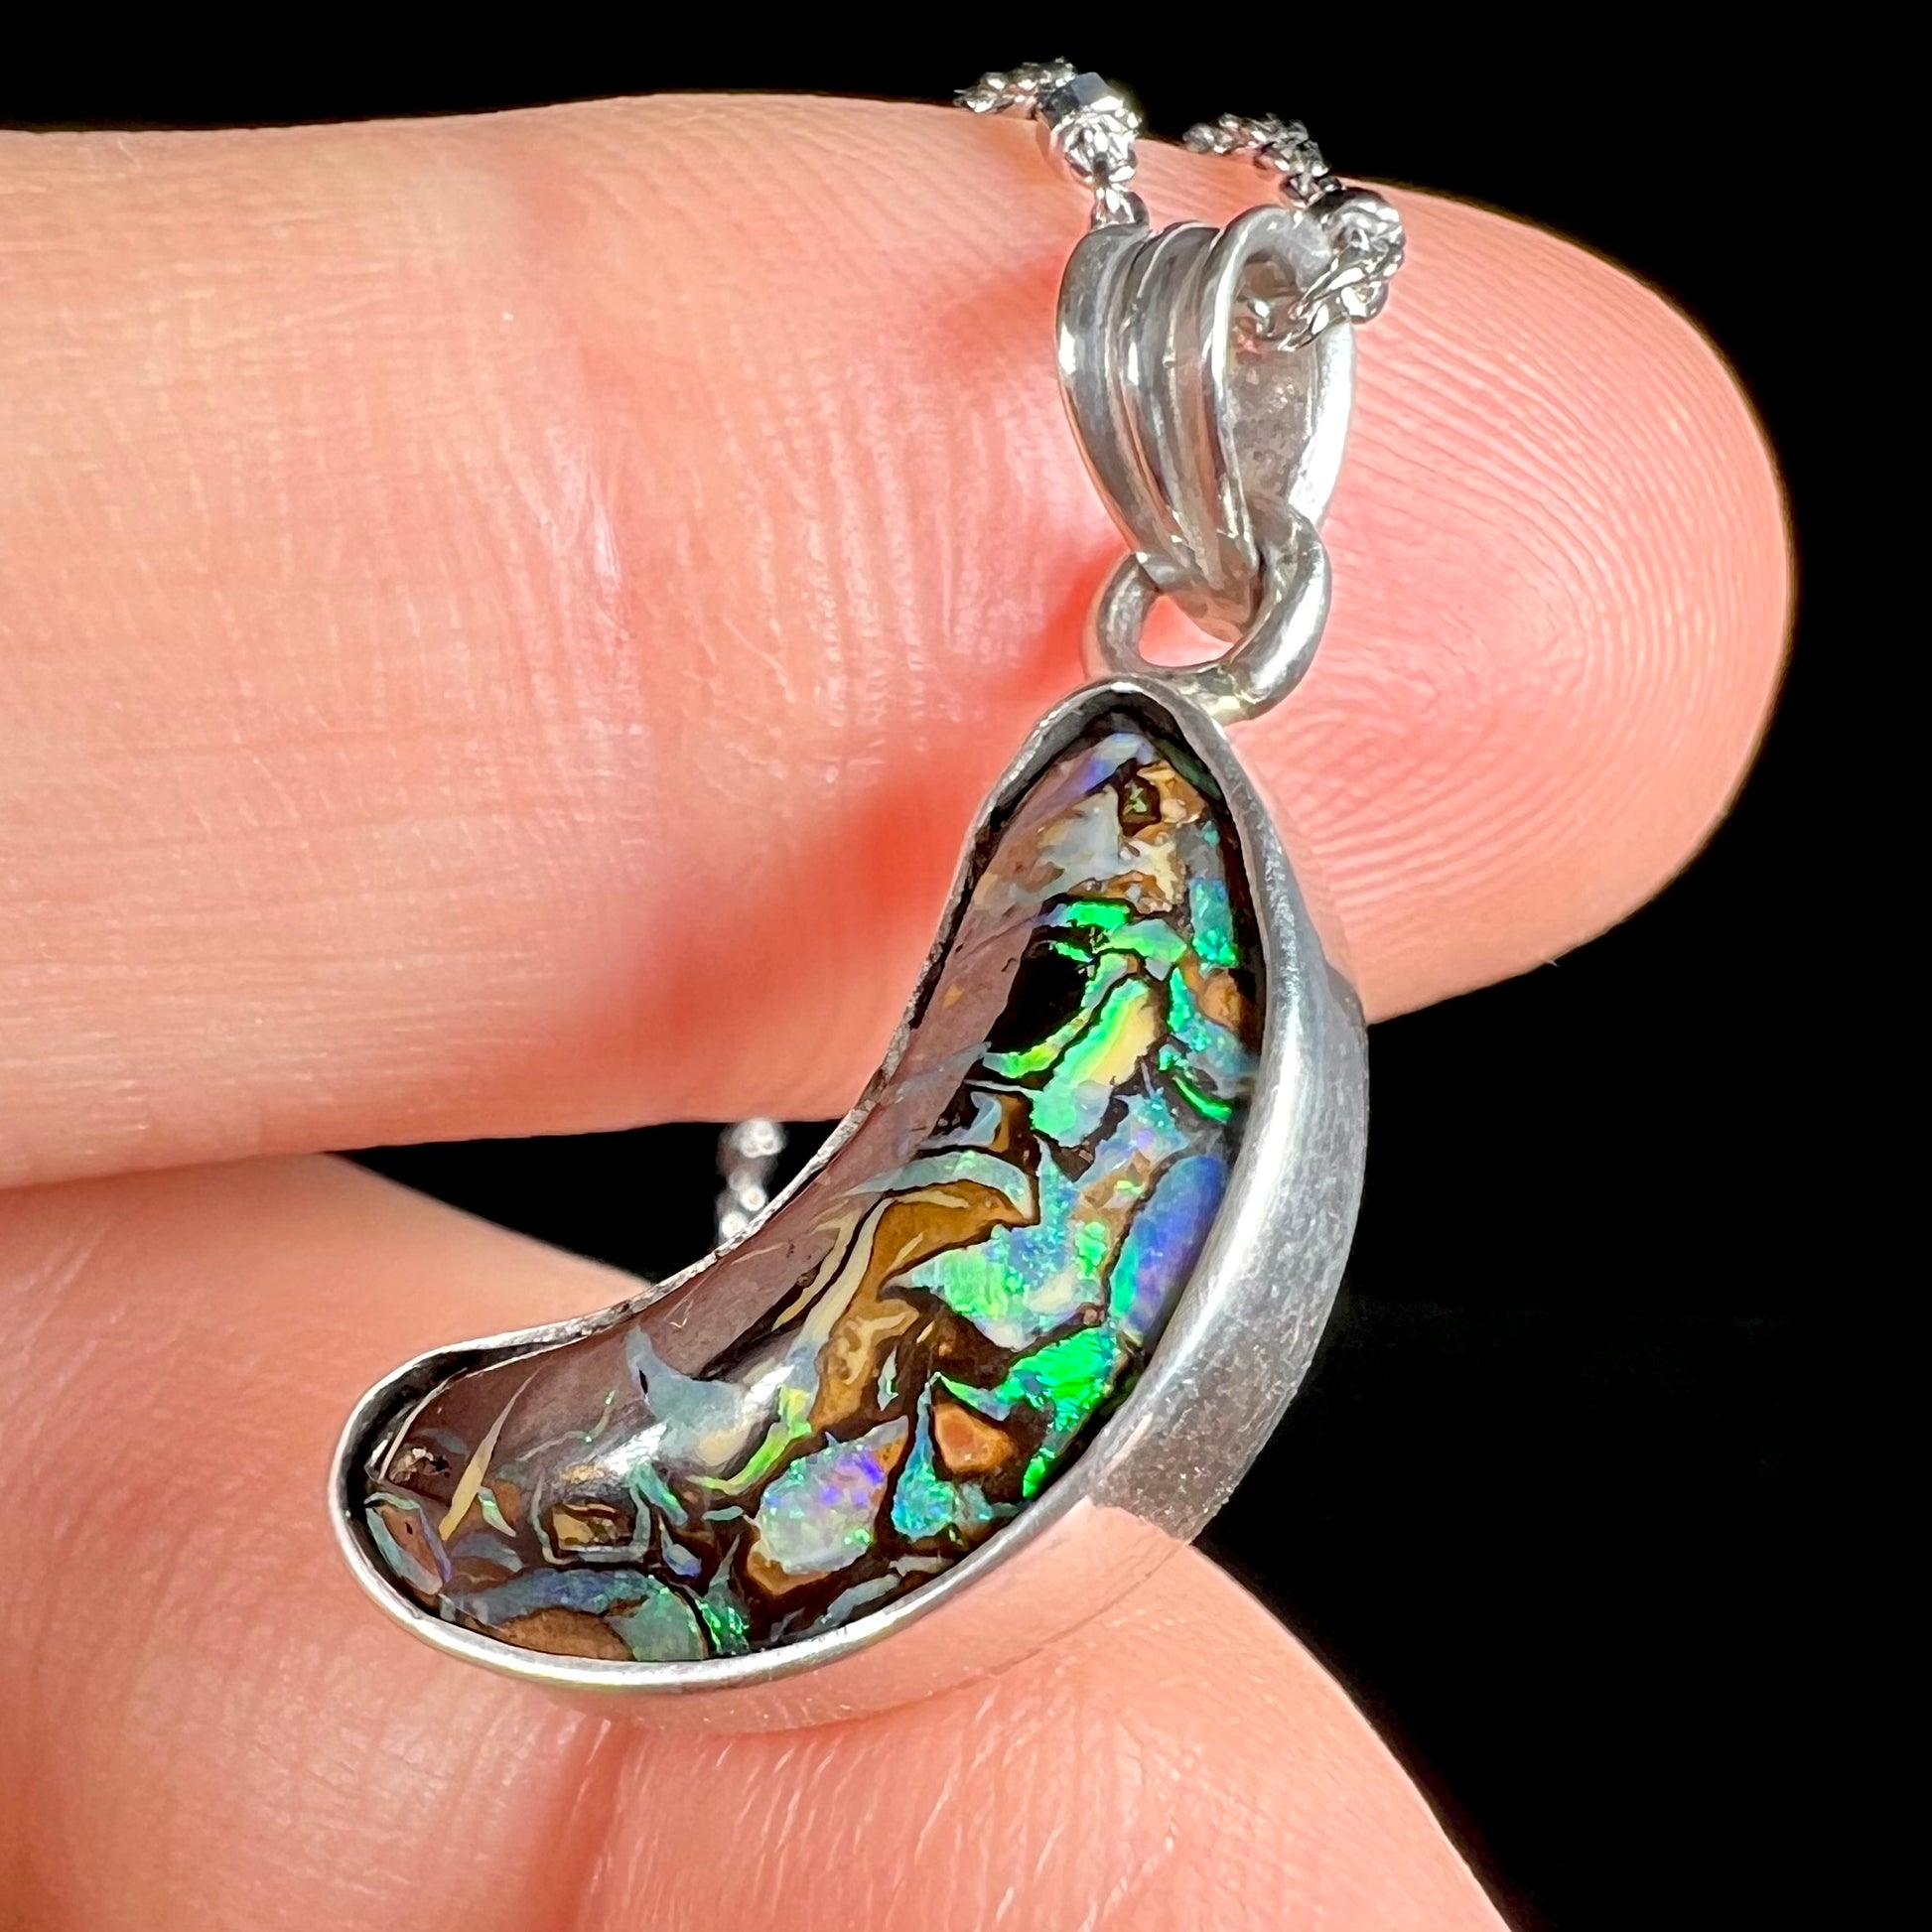 A sterling silver necklace bezel set with a natural Koroit boulder opal stone.  The stone is shaped like a crescent moon.